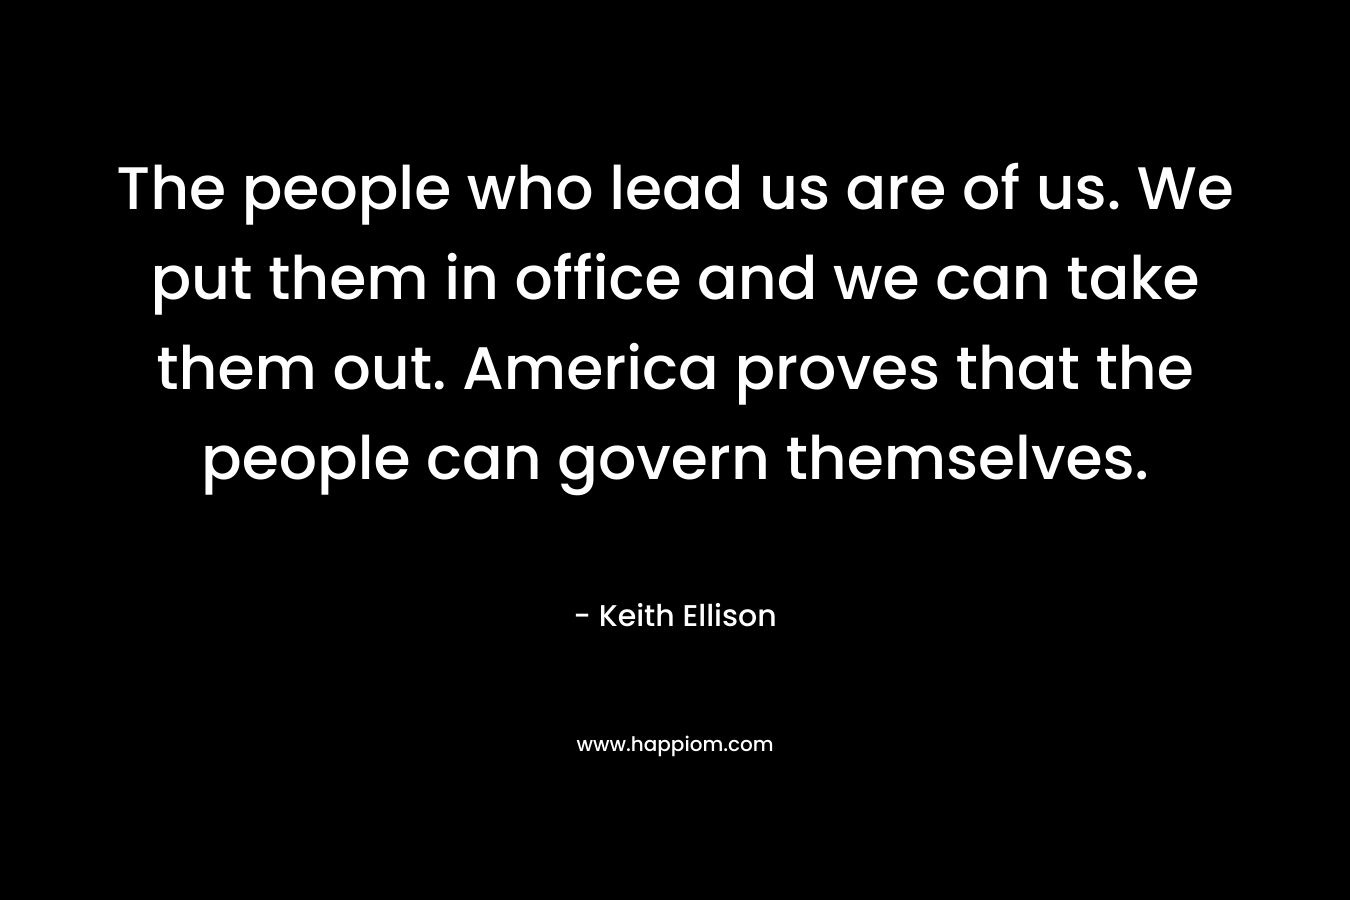 The people who lead us are of us. We put them in office and we can take them out. America proves that the people can govern themselves.